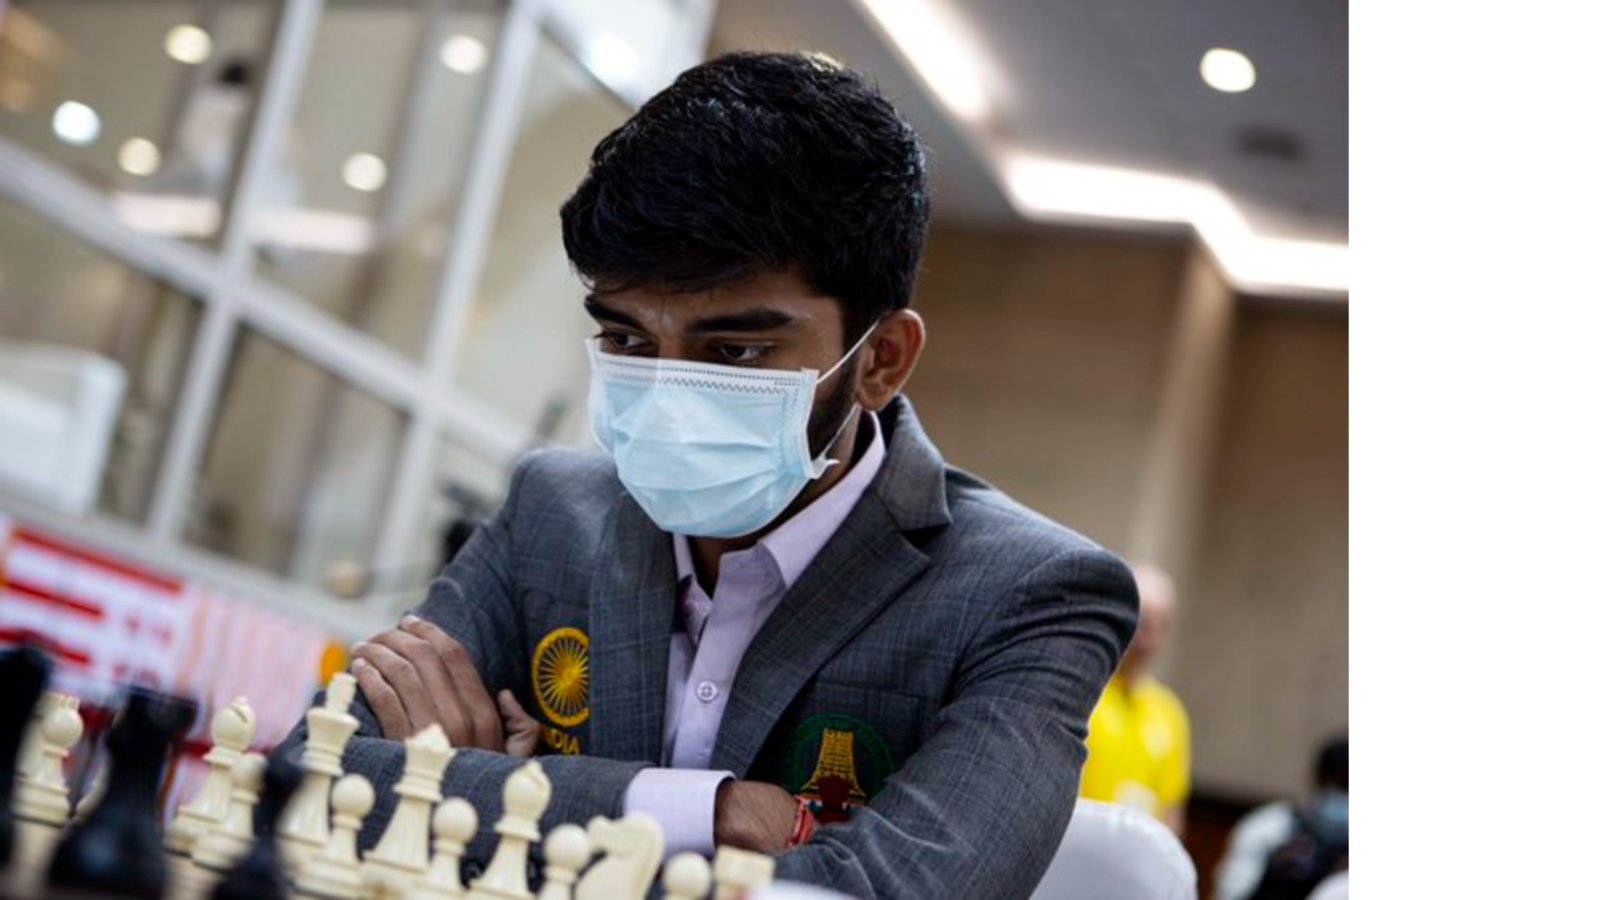 Dommaraju Gukesh reaches the 11th spot in the live World rankings